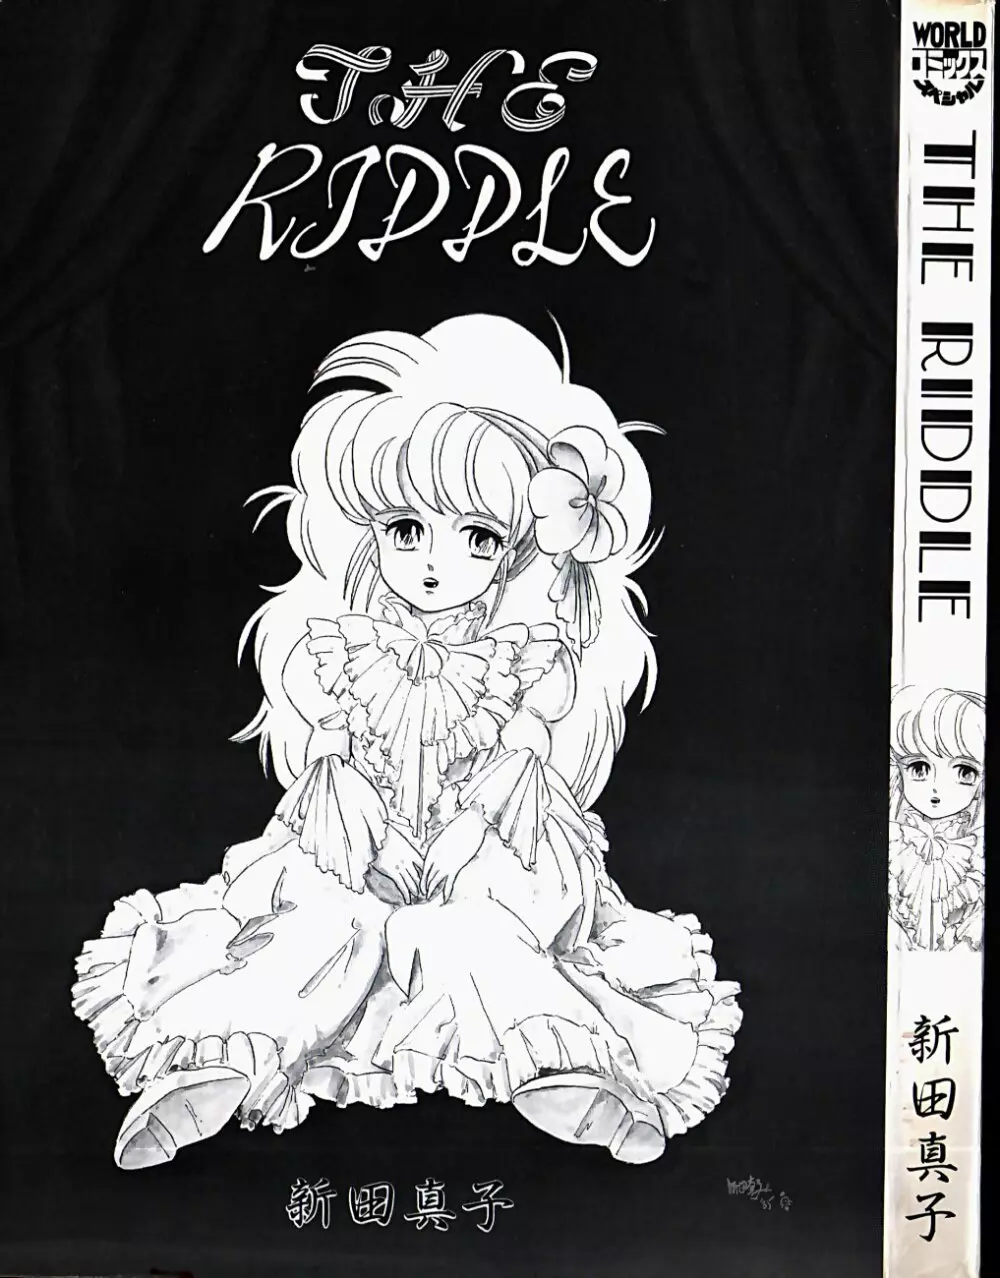 THE RIDDLE 2ページ